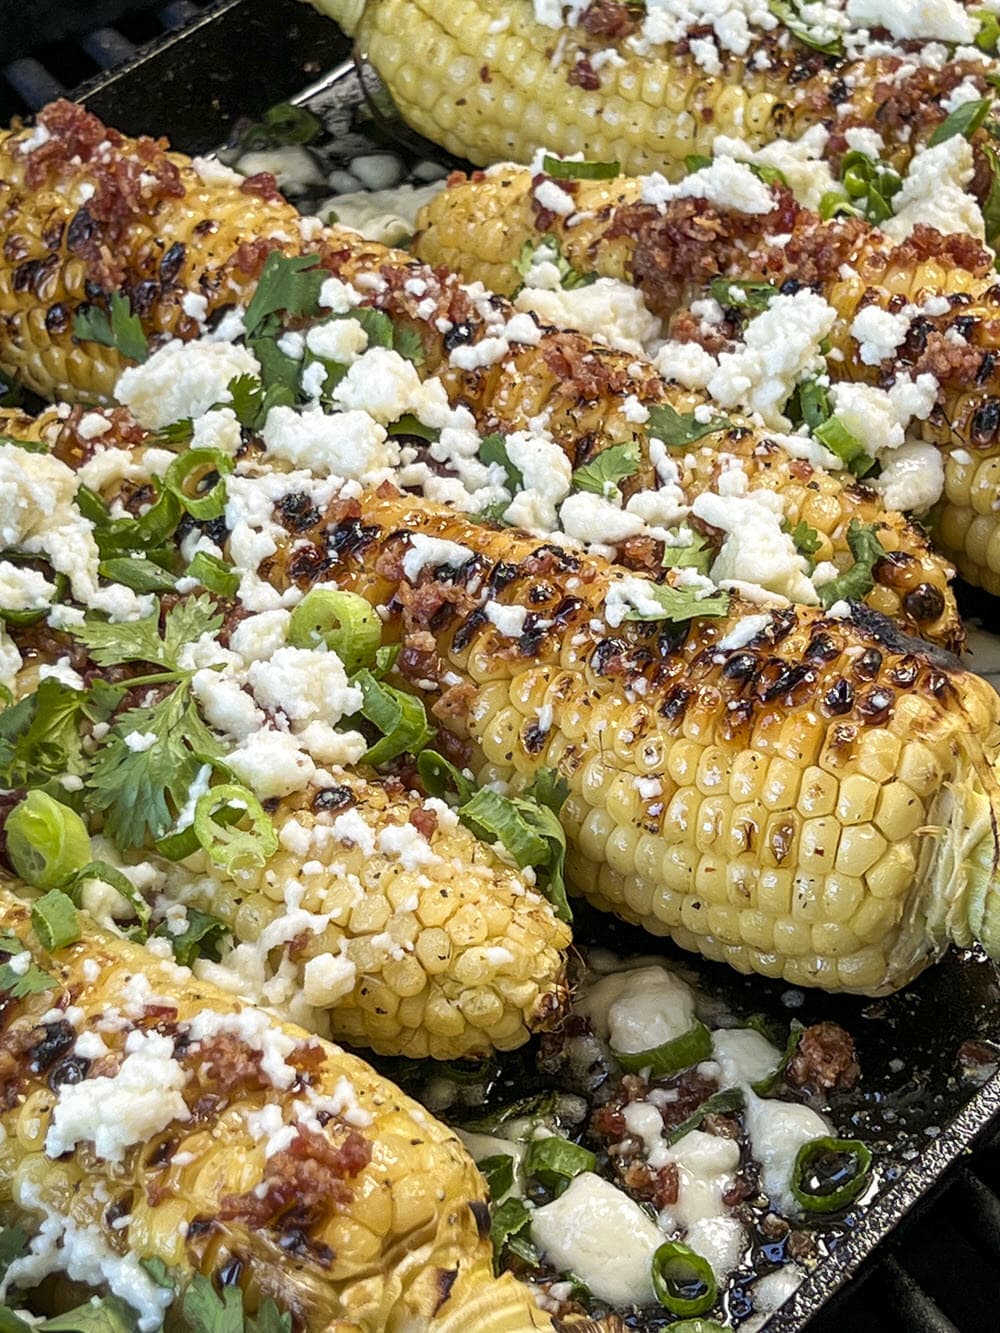 Grilled Corn on the cob topped with onions, cilantro, queso fresco and bacon